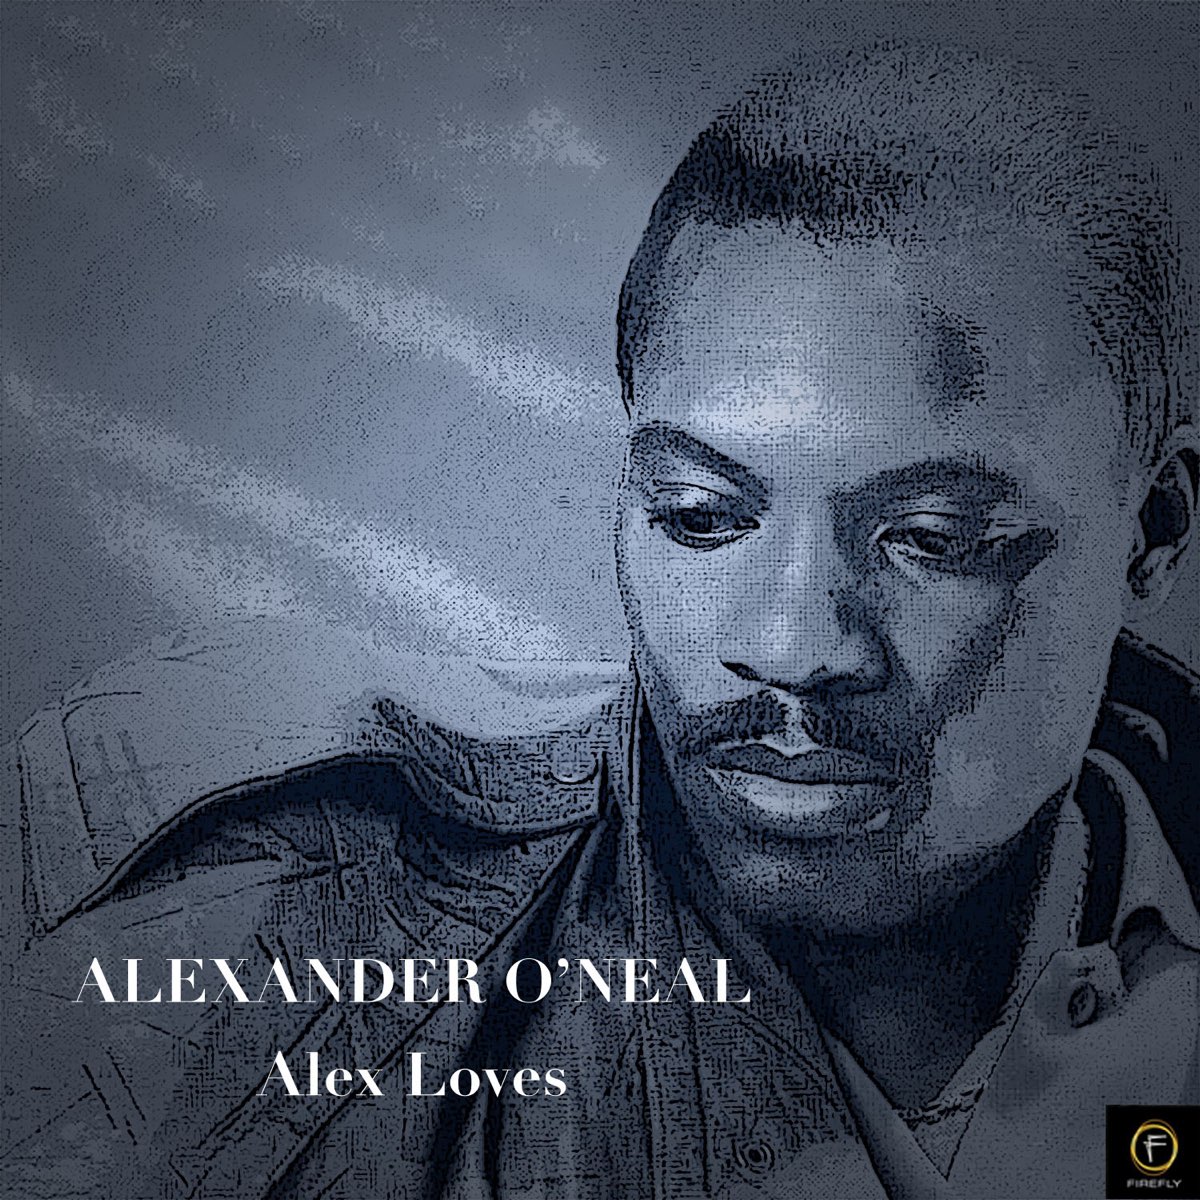 Алекс лове. Alexander o'Neal if you were here Tonight. From Alex with Love.